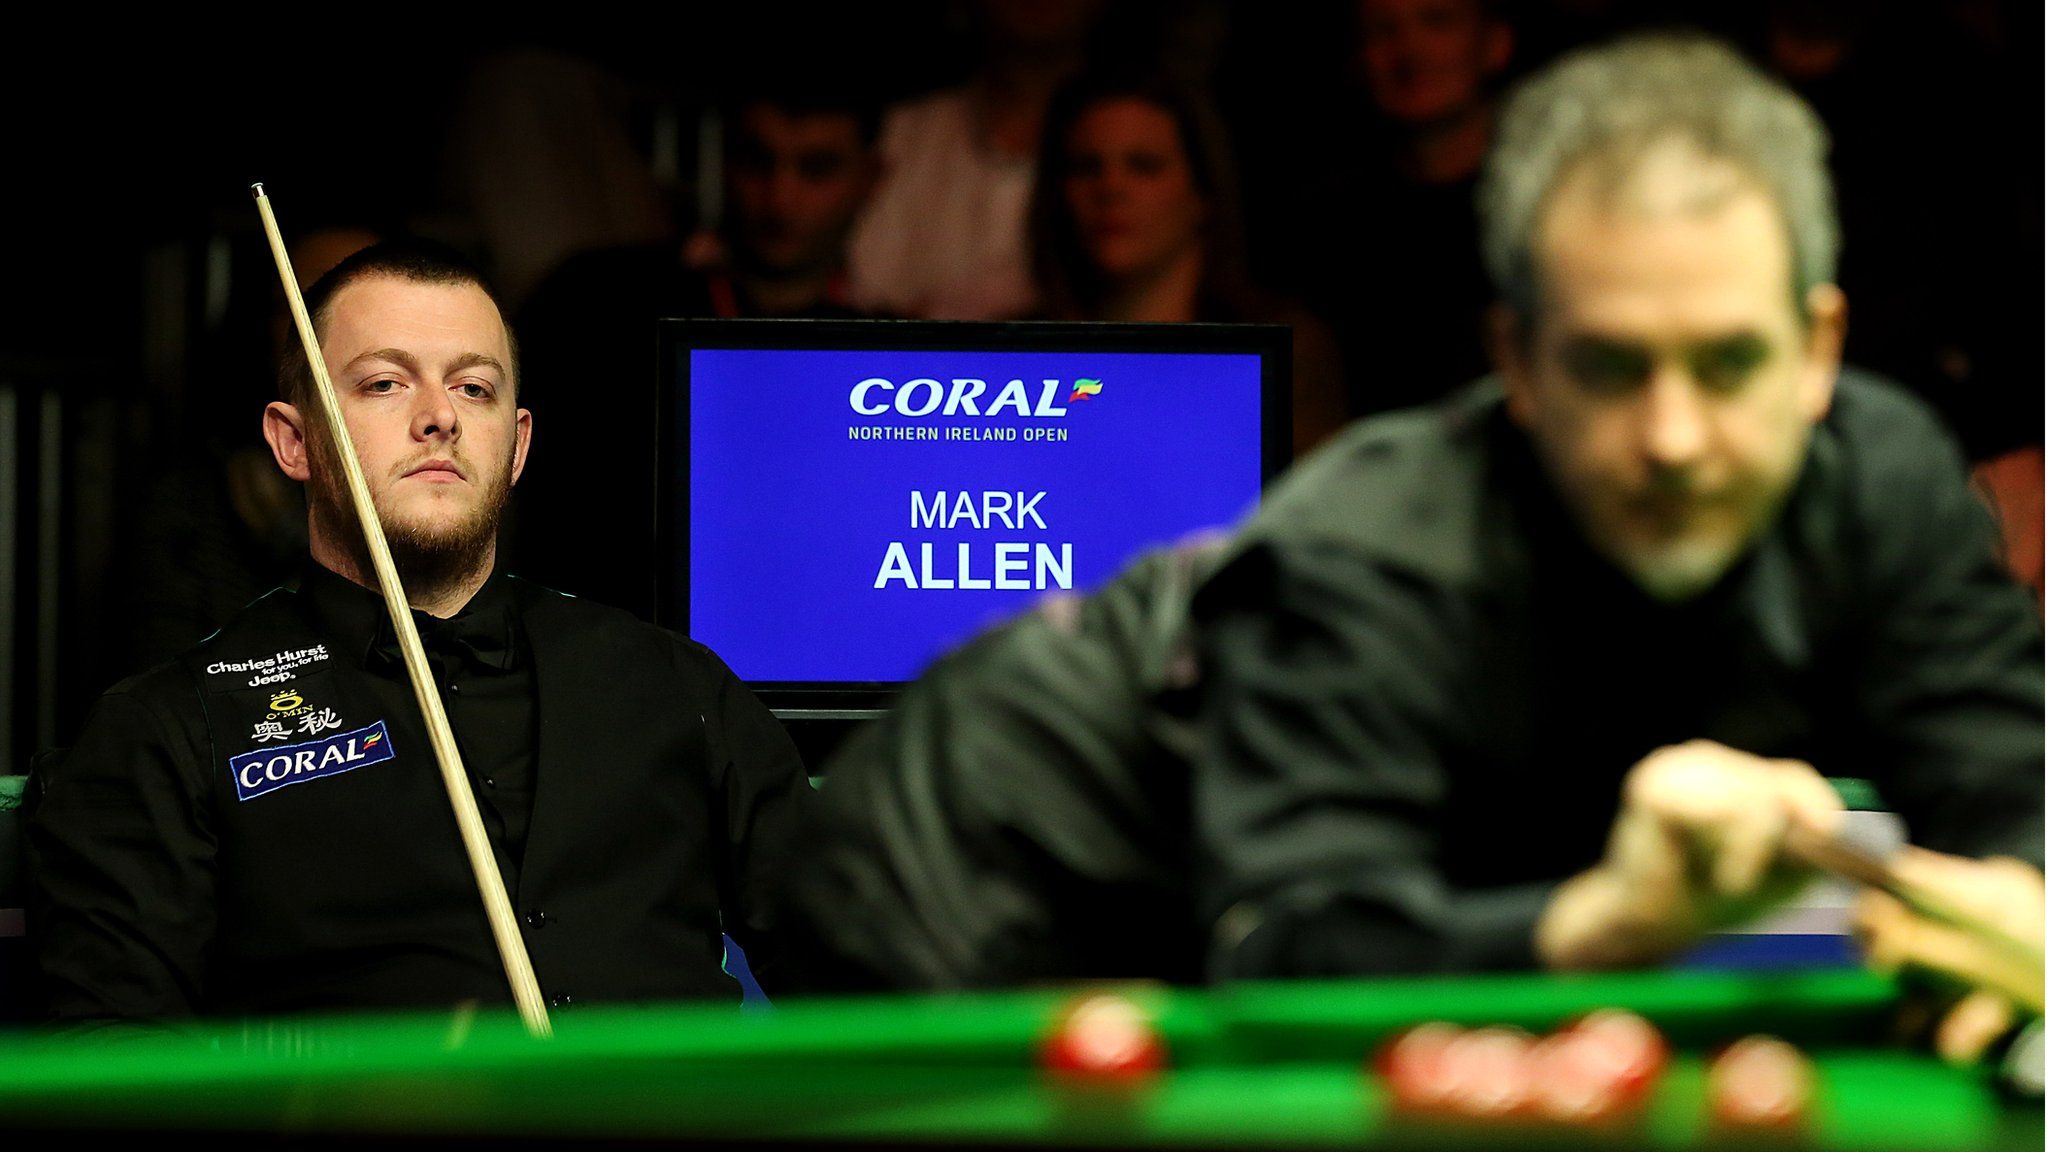 Mark Allen can only watch on as Anthony Hamilton plays a shot